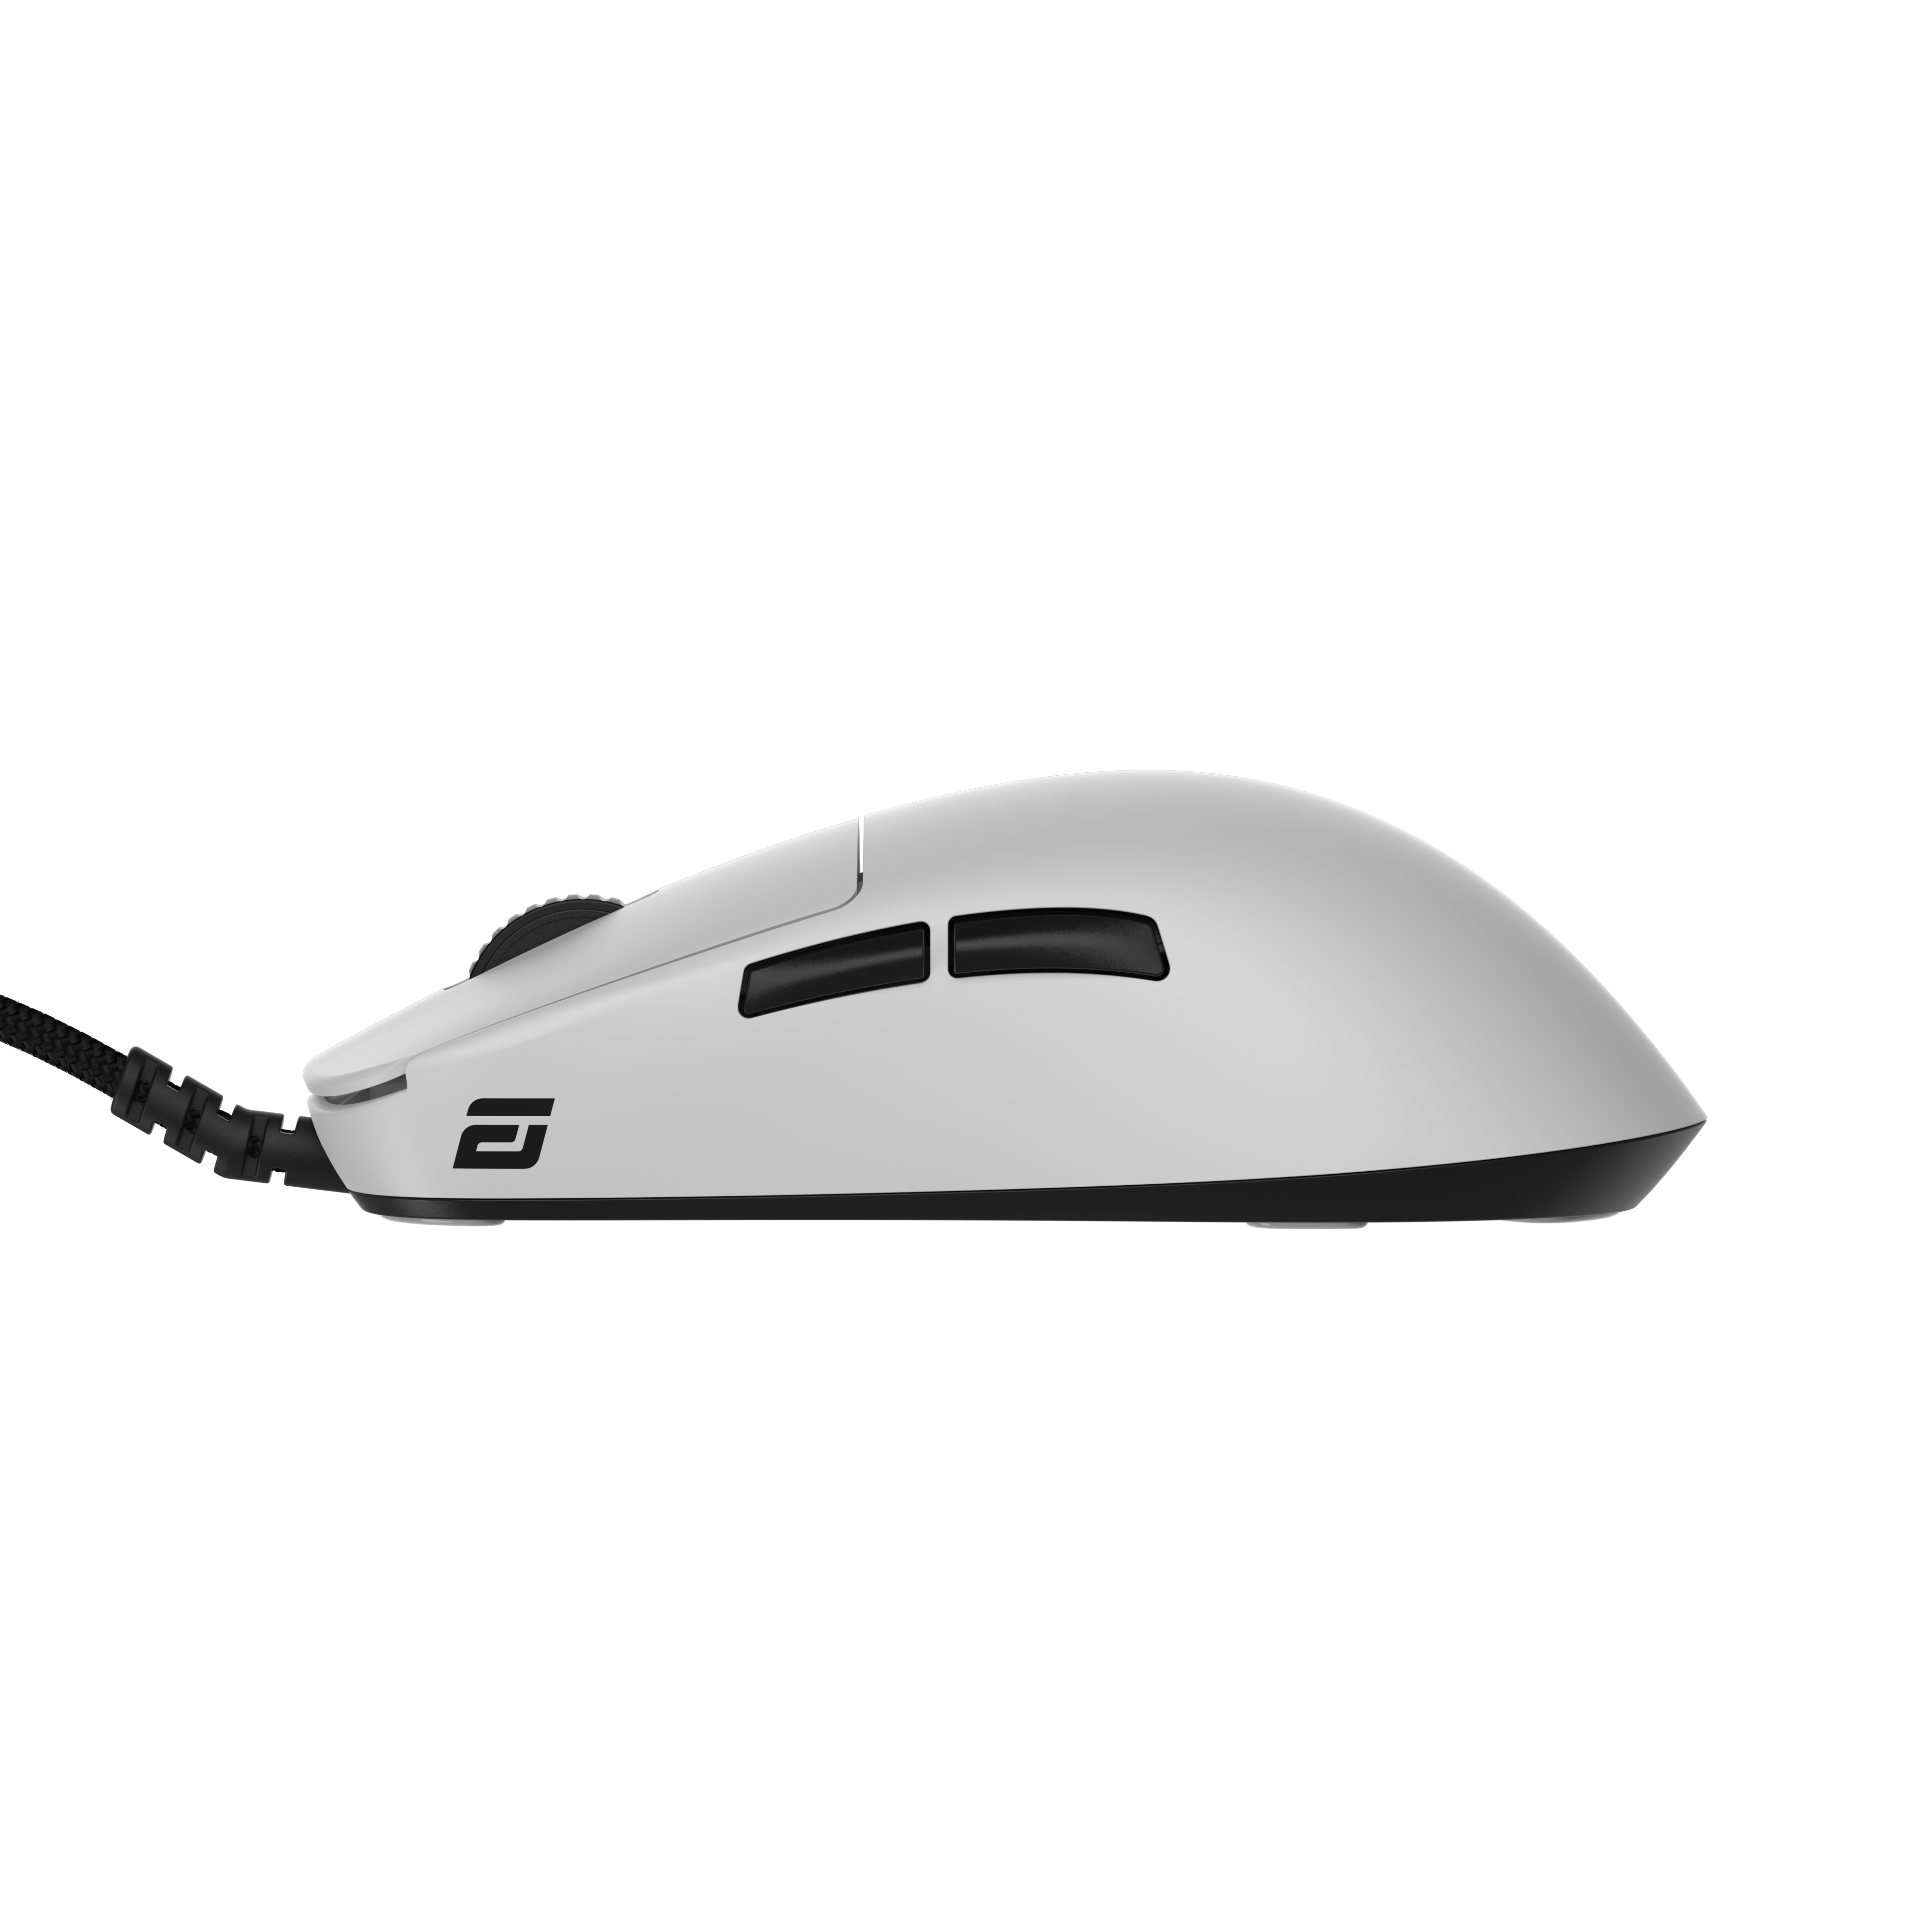  - OP1 Gaming Mouse - White